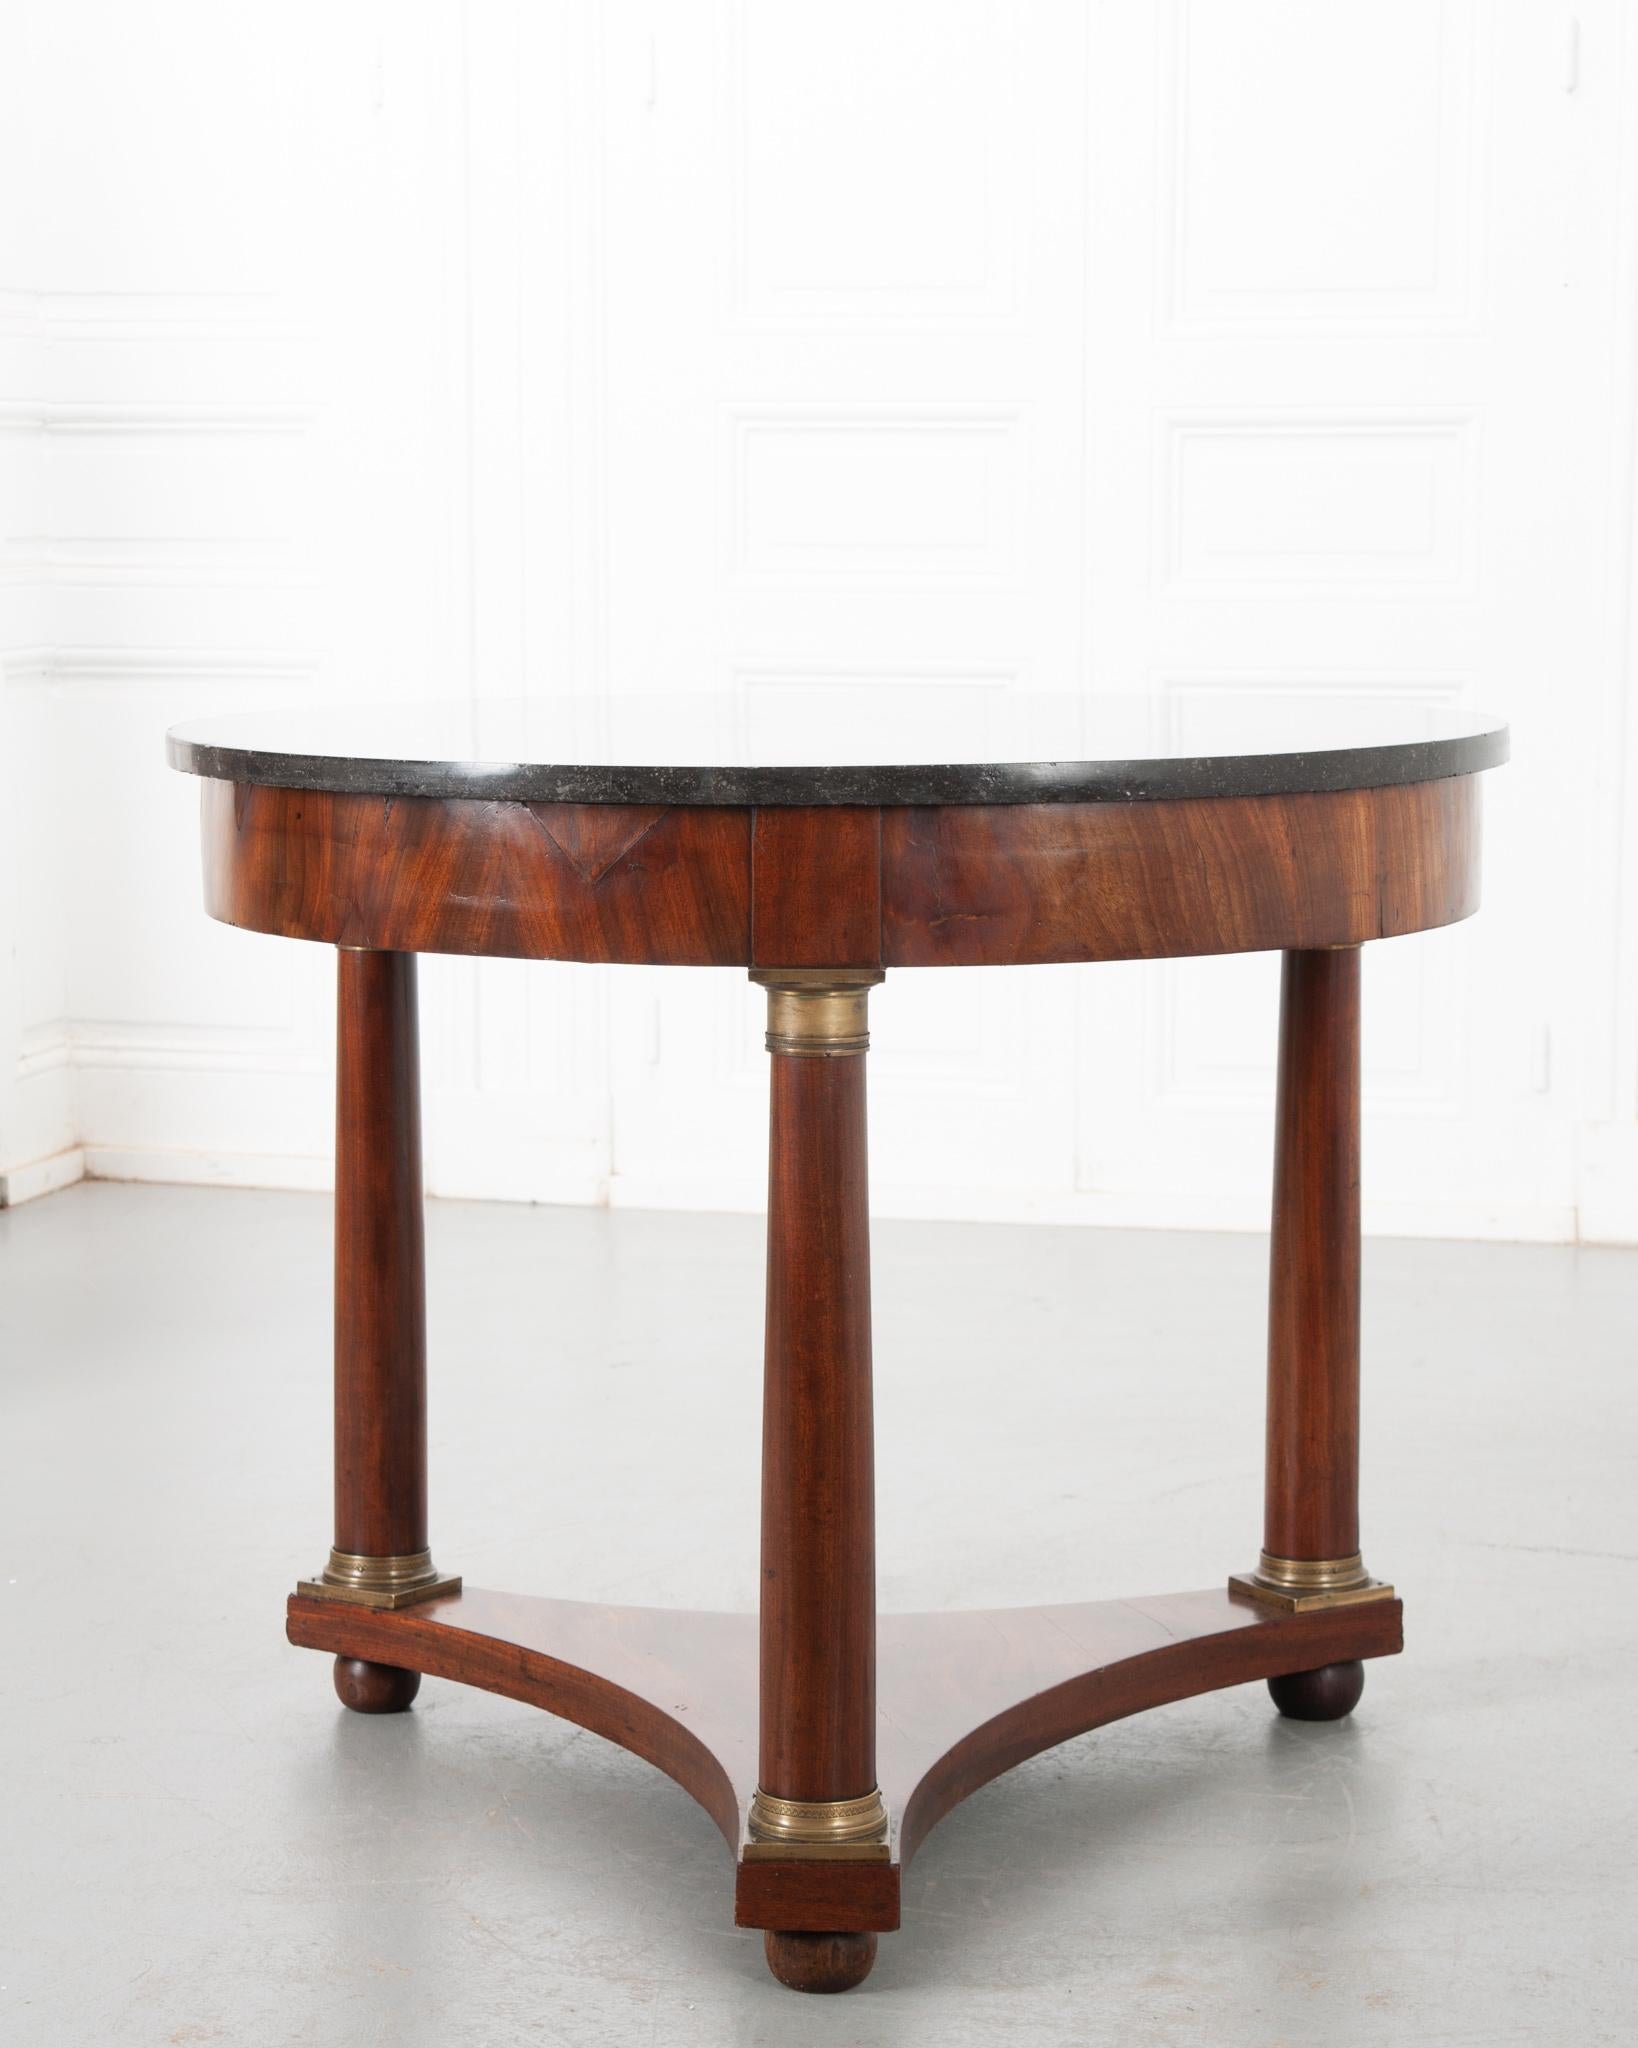 A sizable Empire style gueridon table from 19th century France. Beautiful black fossil marble over a mahogany body. A simple apron showcases the deep toned wood. Three columnar legs with decorative brass ormolu capitals and bases rest on a